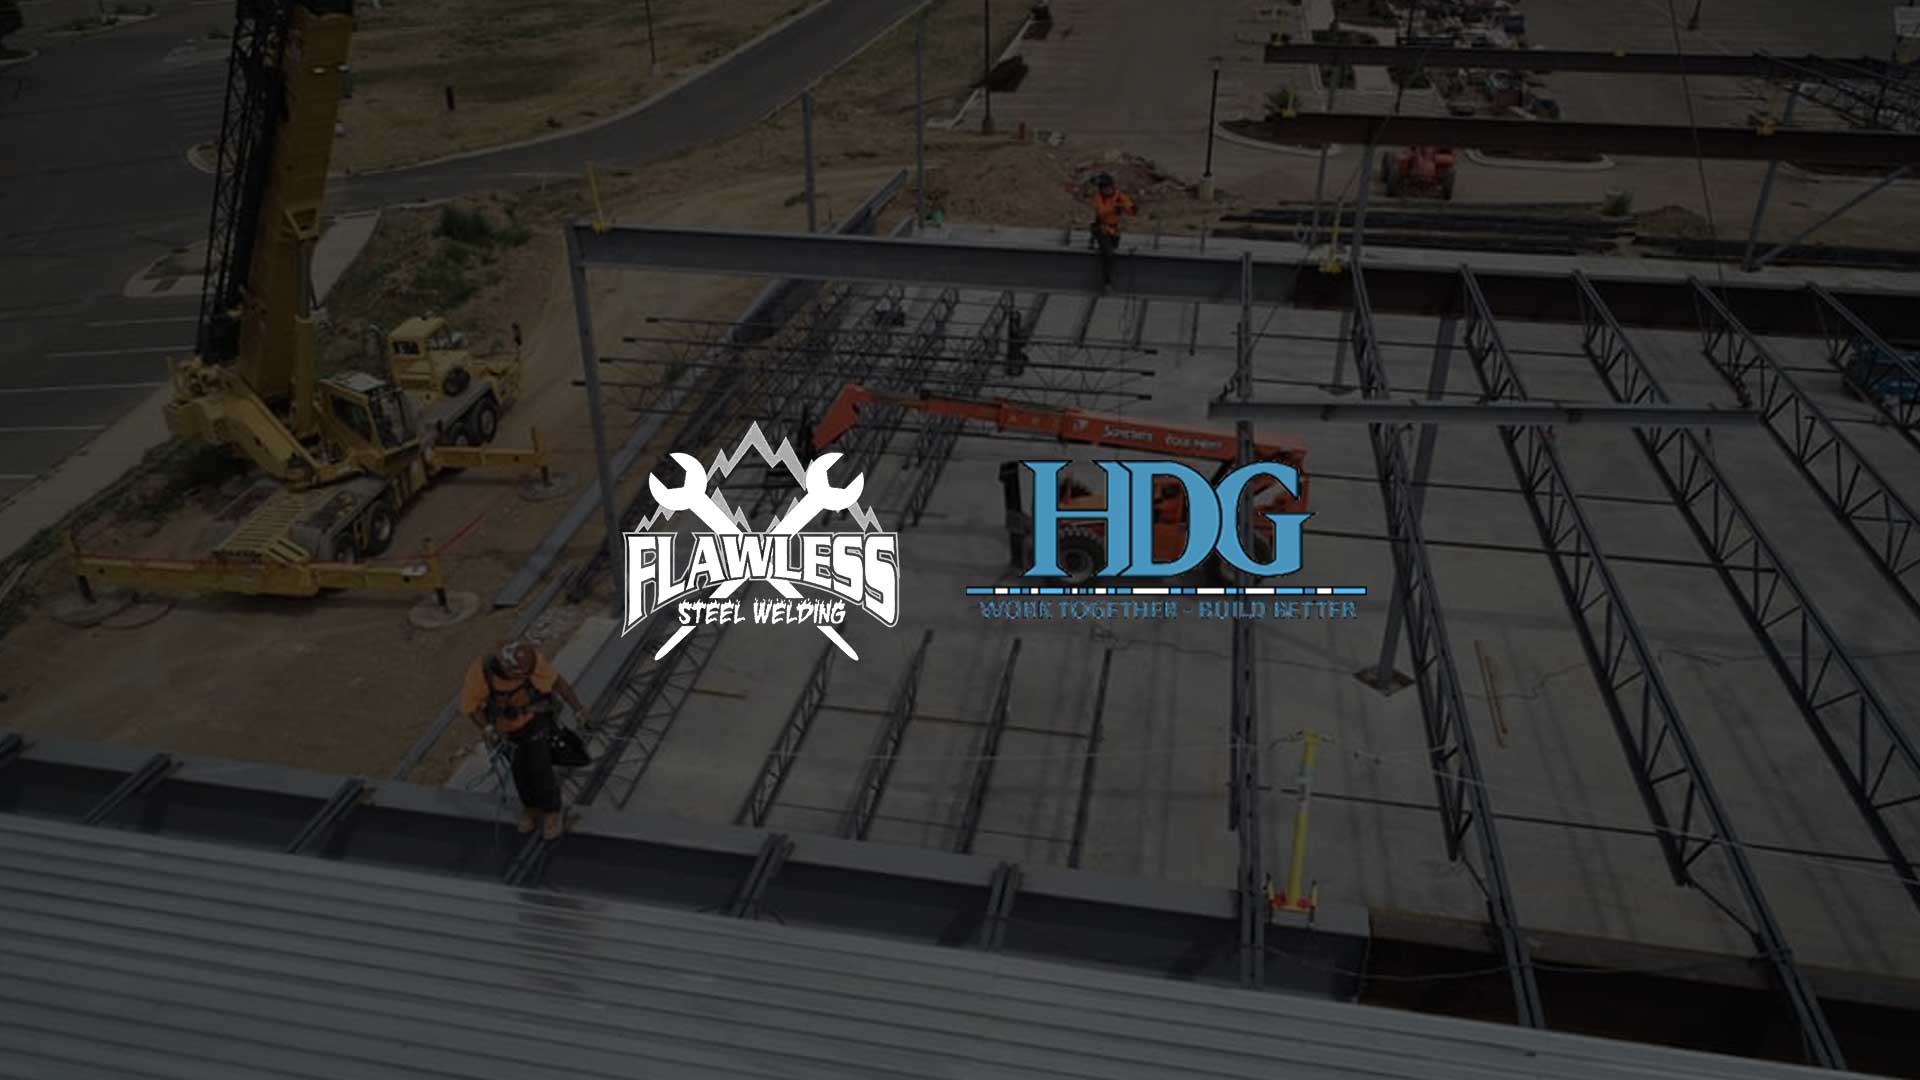 Flawless steel welding logo and HDG logo against a construction worker, construction equipment, and steel structure background.